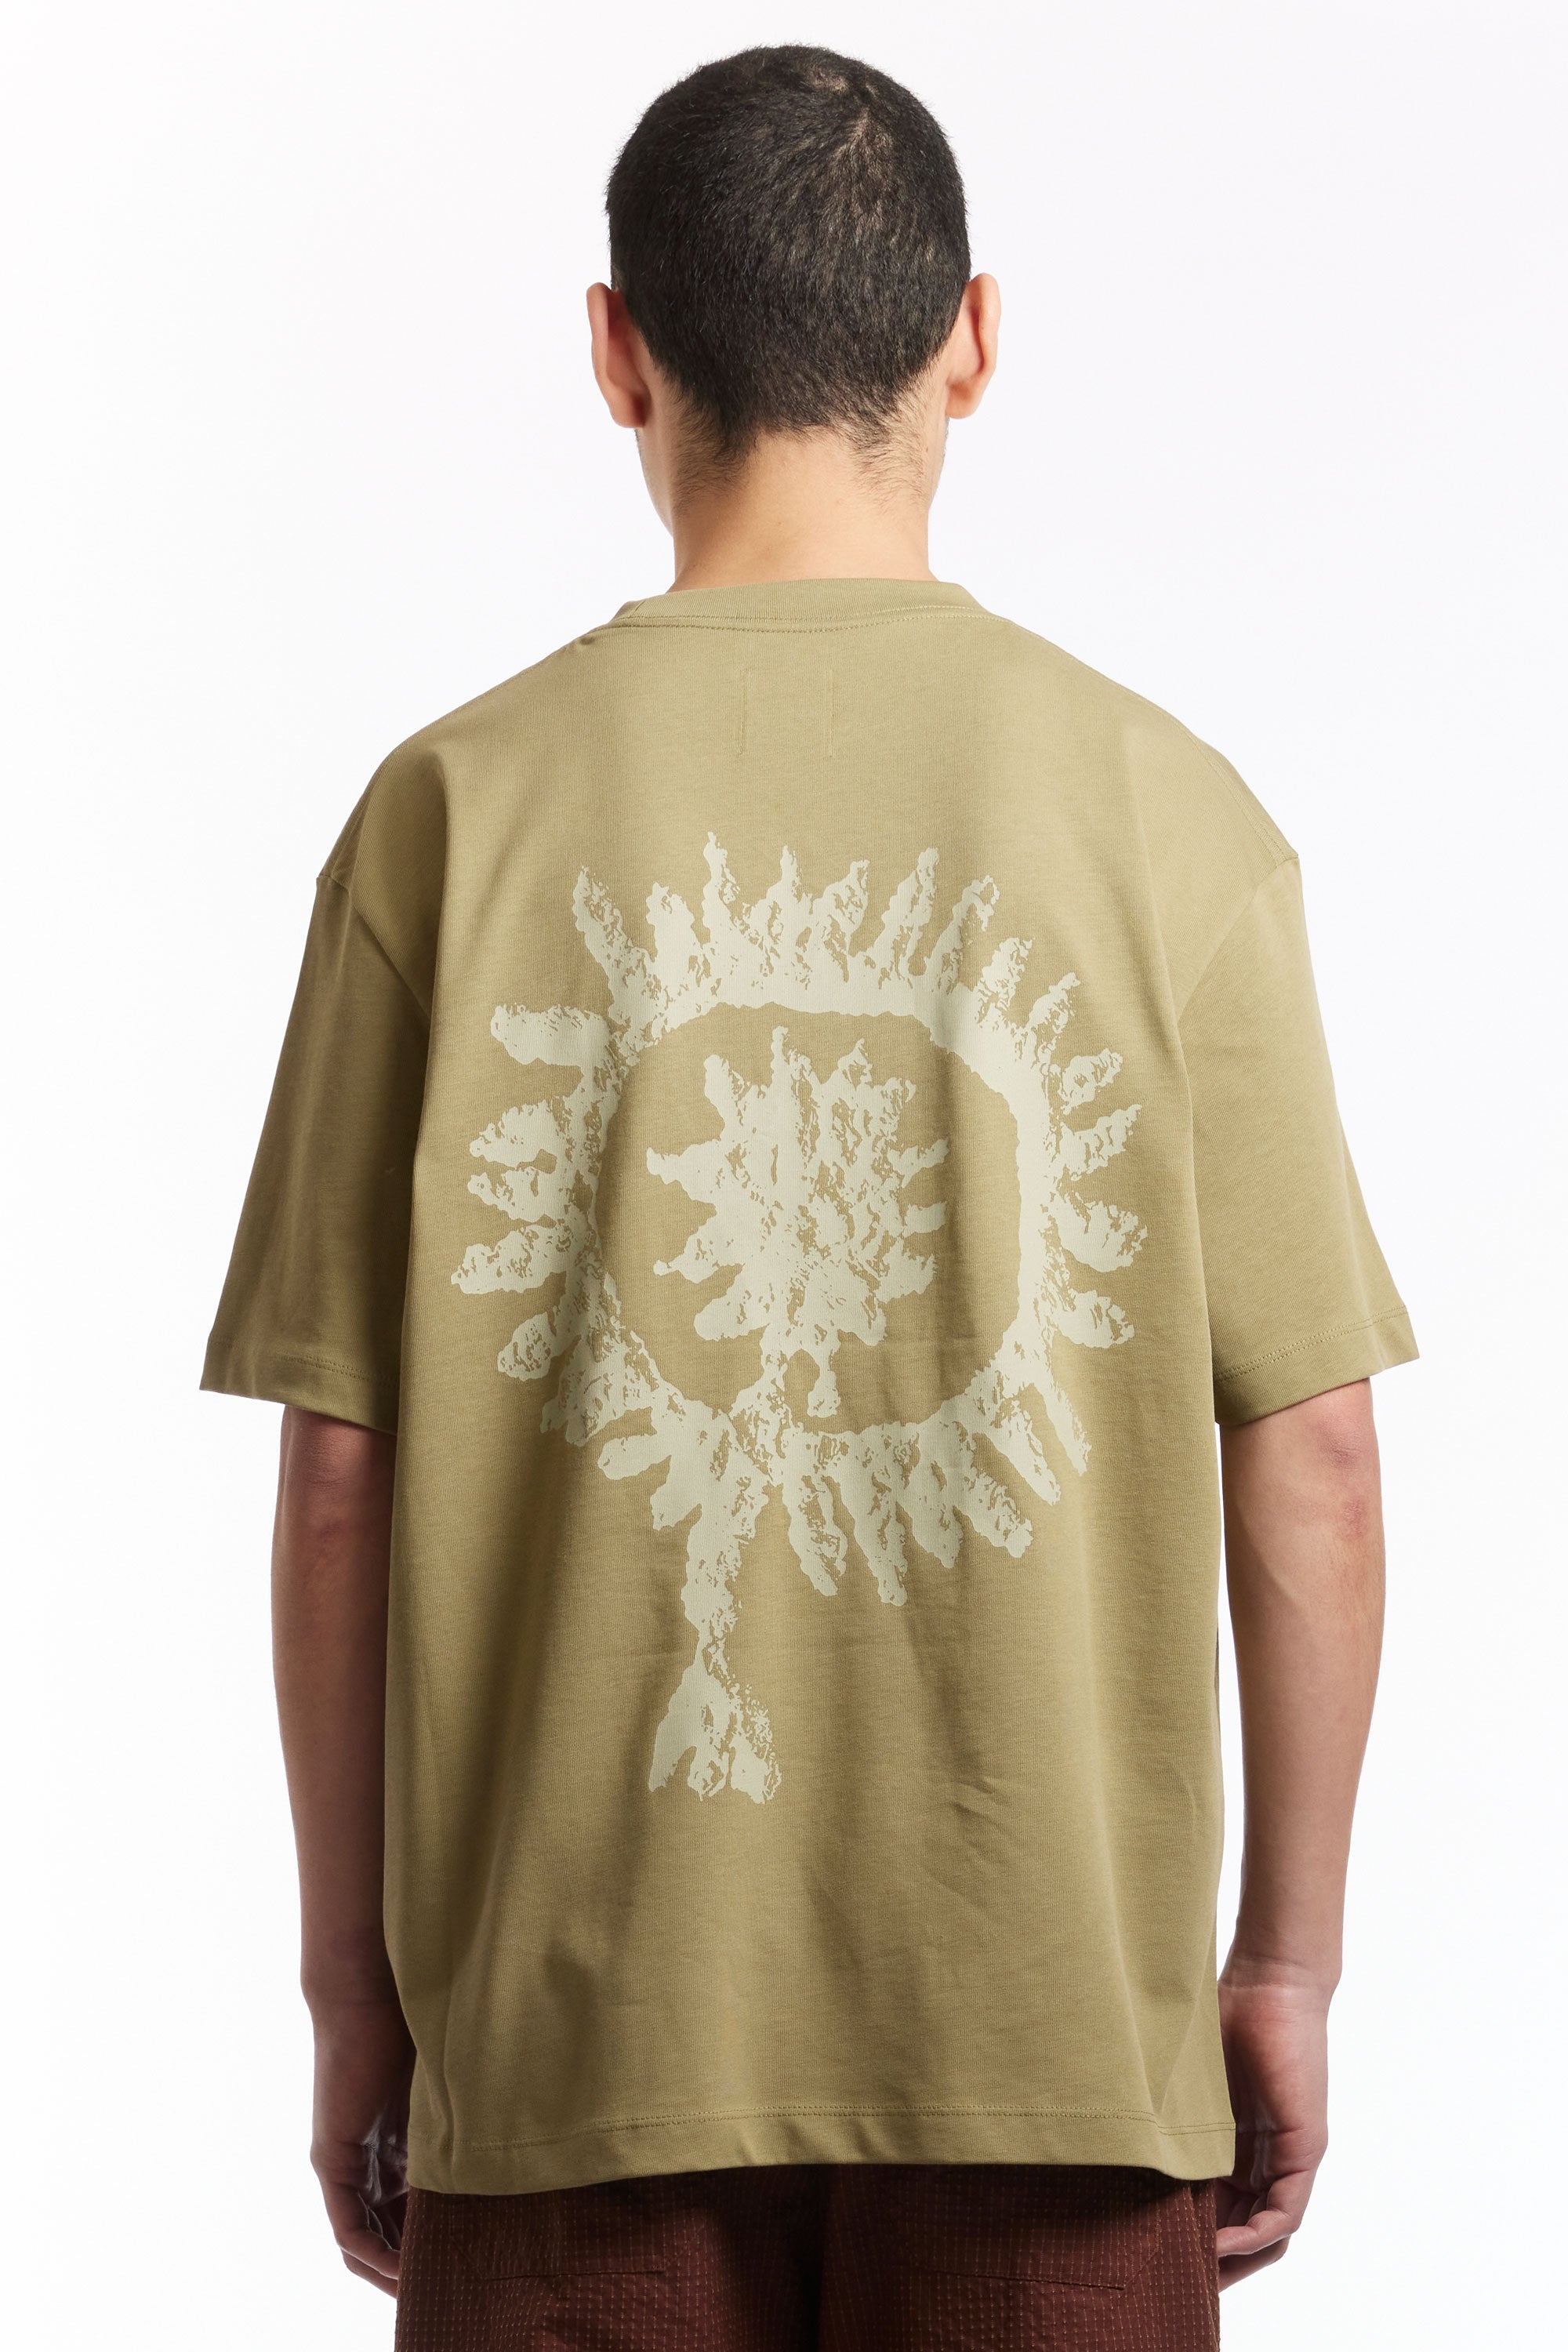 The ROA - ALOE SHORTLEEVE GRAPHIC T-SHIRT  available online with global shipping, and in PAM Stores Melbourne and Sydney.